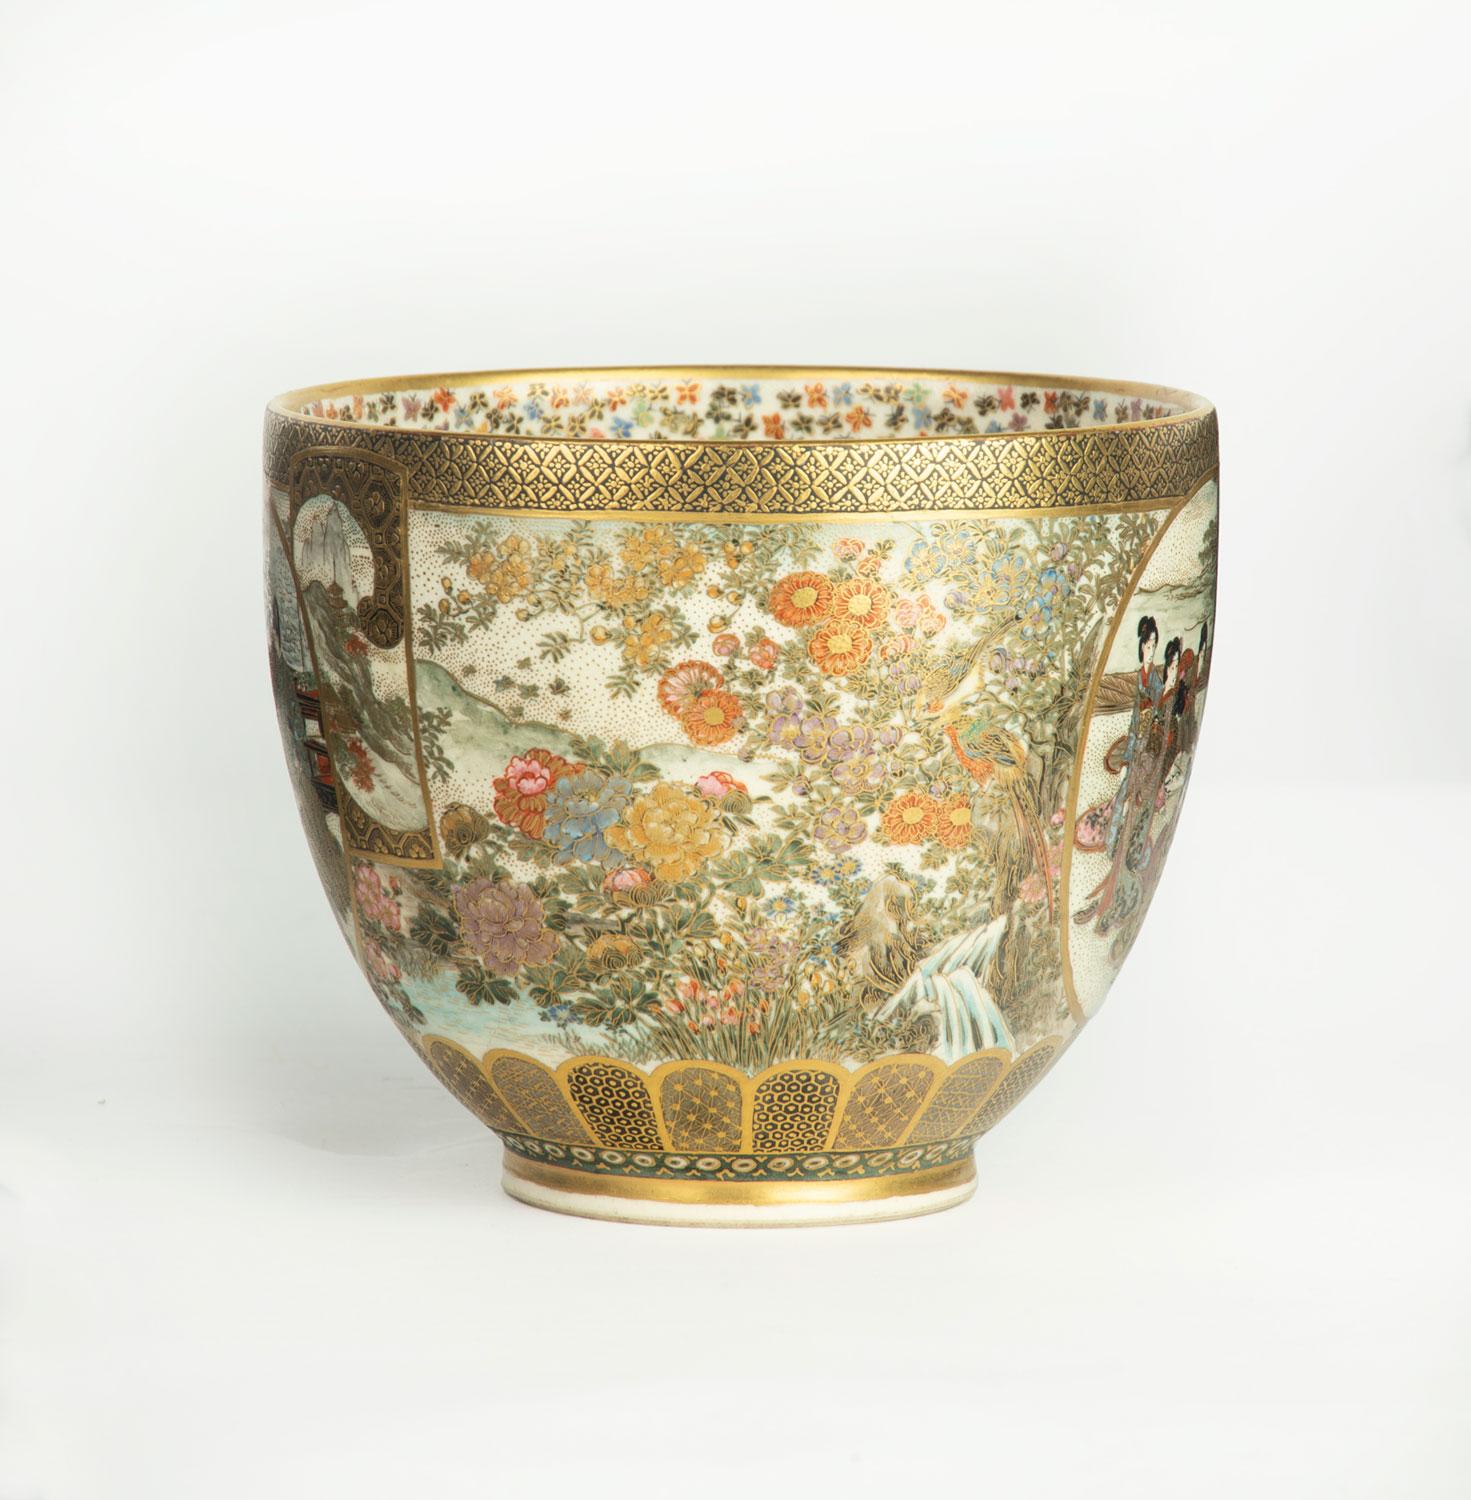 As part of our Japanese works of art collection we are delighted to offer this fine quality Meiji Period 1868-1912 , deep sided Satsuma bowl in the form of a chawan (tea bowl), the exterior richly decorated with panels of figures, flowers and